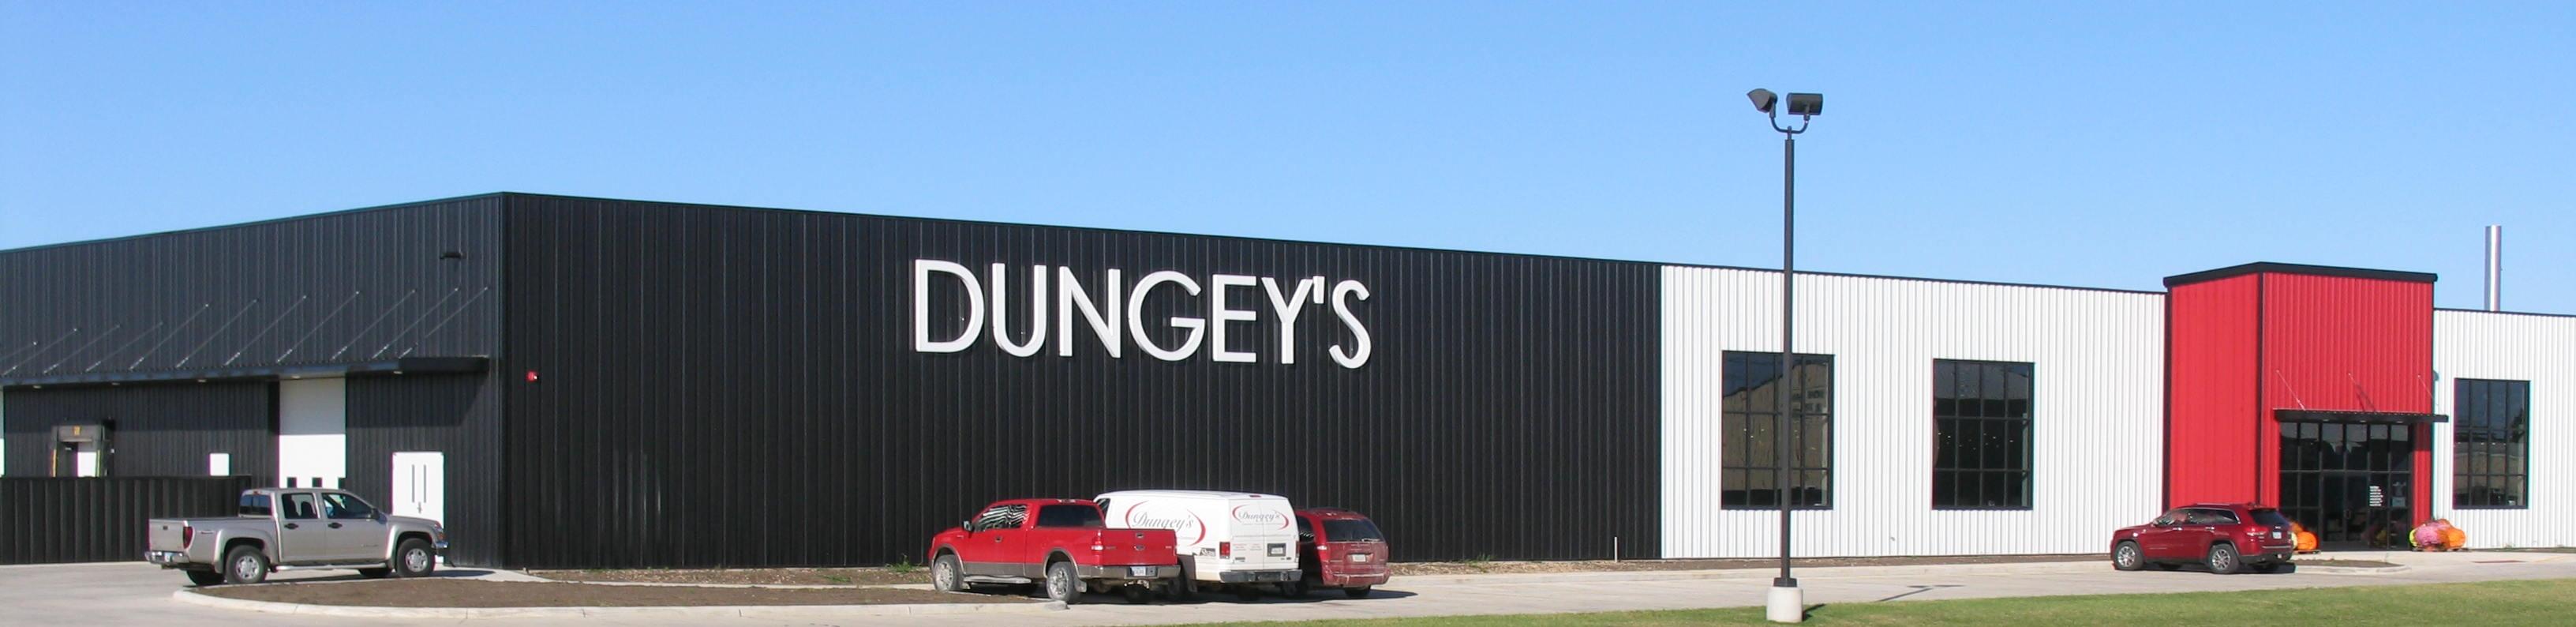 Dungeys Furniture New Hampton 3 Sold by HBS Inc